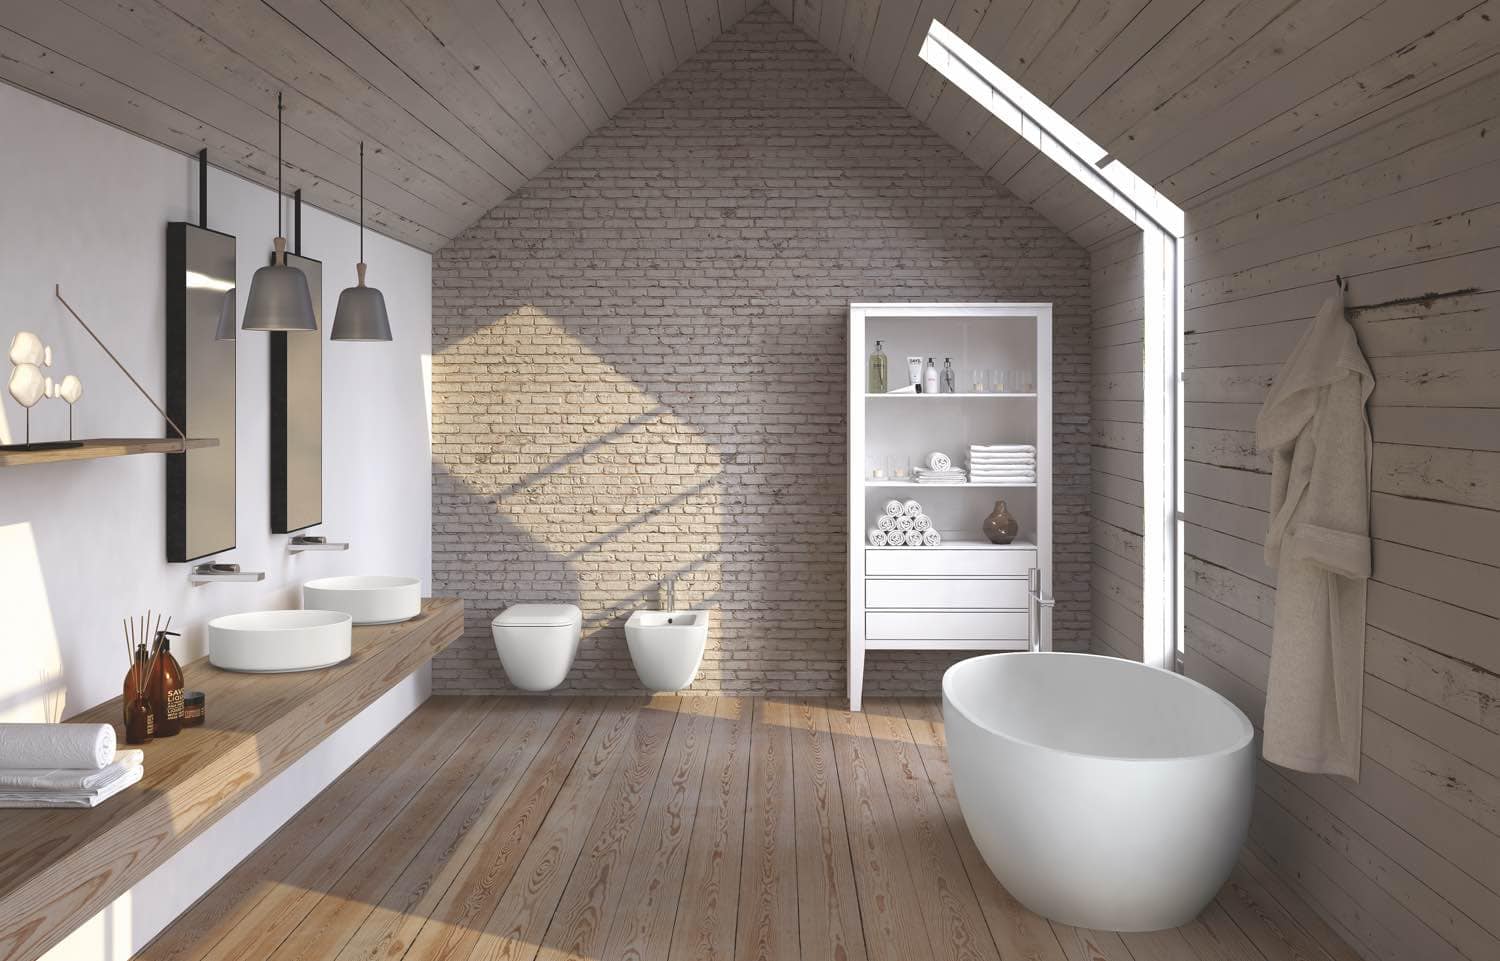 Surface Design Nelson for Tiles and Bathrooms